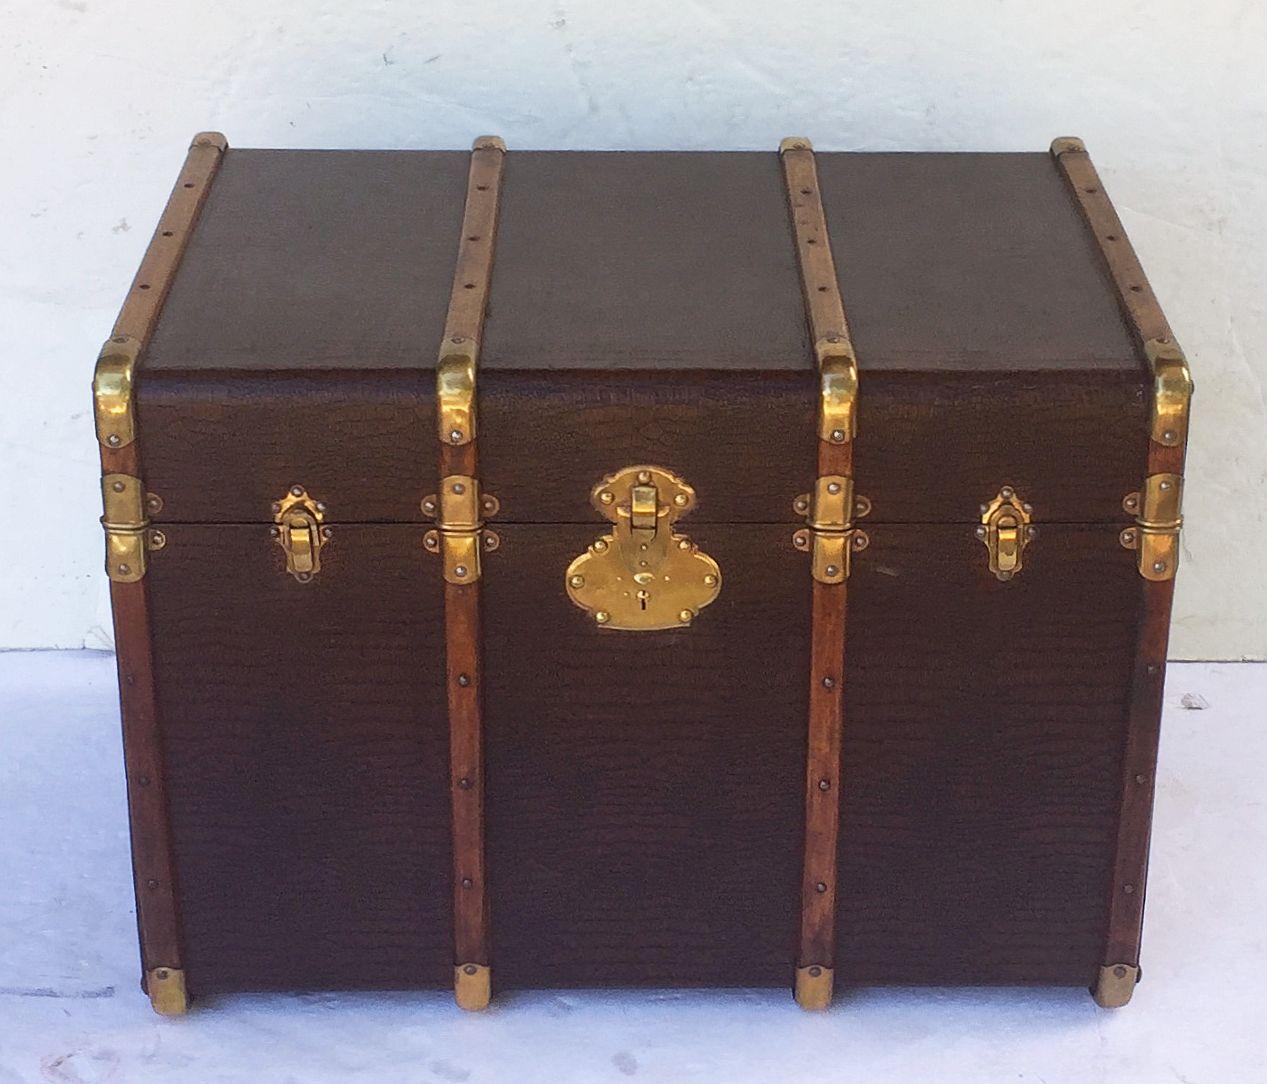 A handsome large English traveler's luggage or shipping trunk of brass-bound paneled wood, featuring an embossed faux leather covering, brass and leather hardware, and a lined patterned interior.